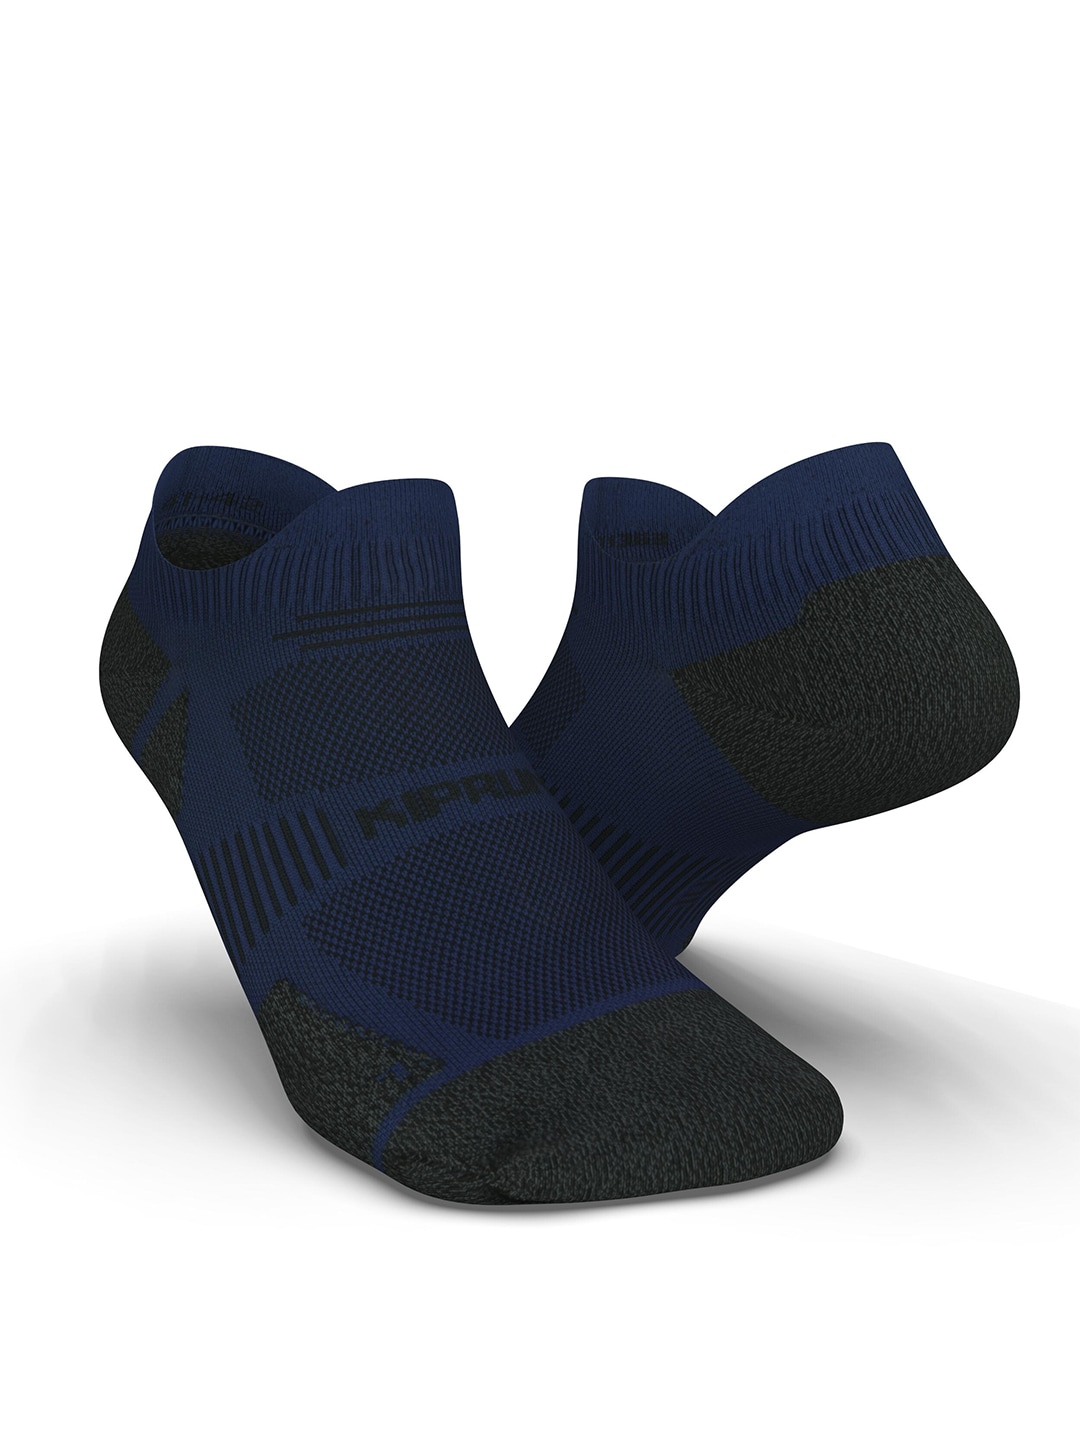 KIPRUN By Decathlon Assorted Ankle-Length Run900 Invisible Fine Running Socks Price in India